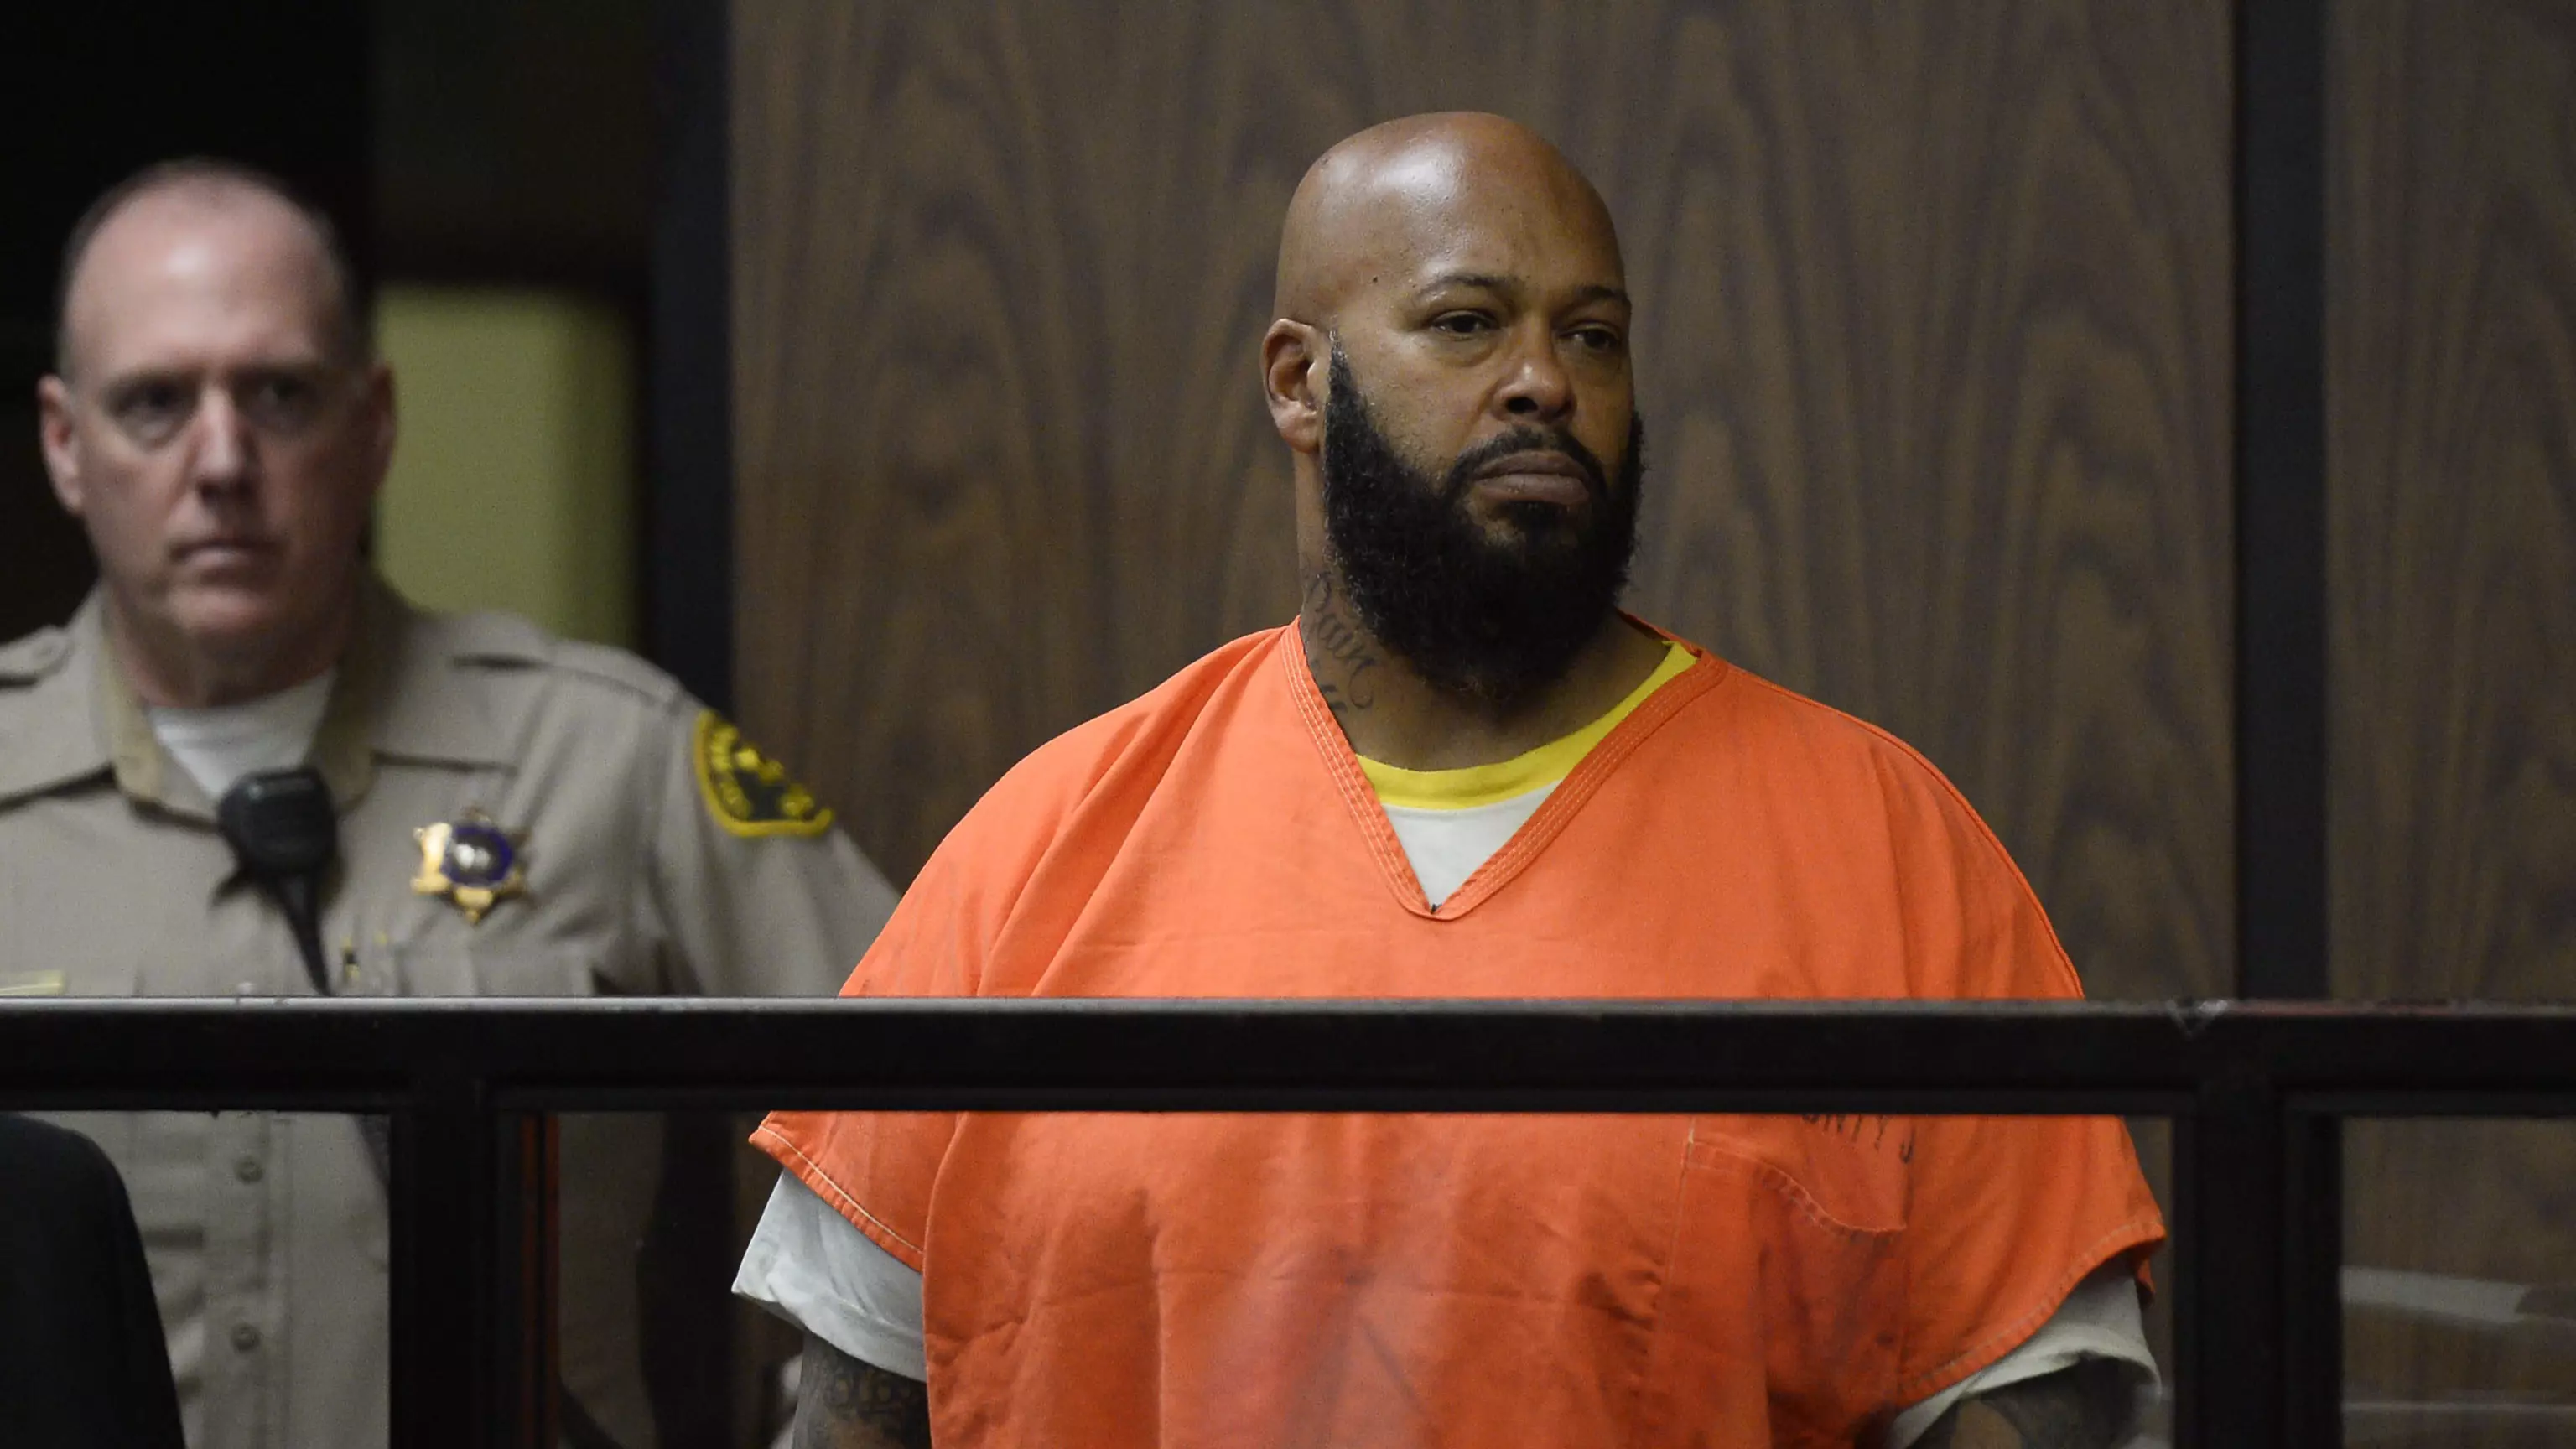 Suge Knight 'Reveals' The Name Of Those Behind Tupac's Murder